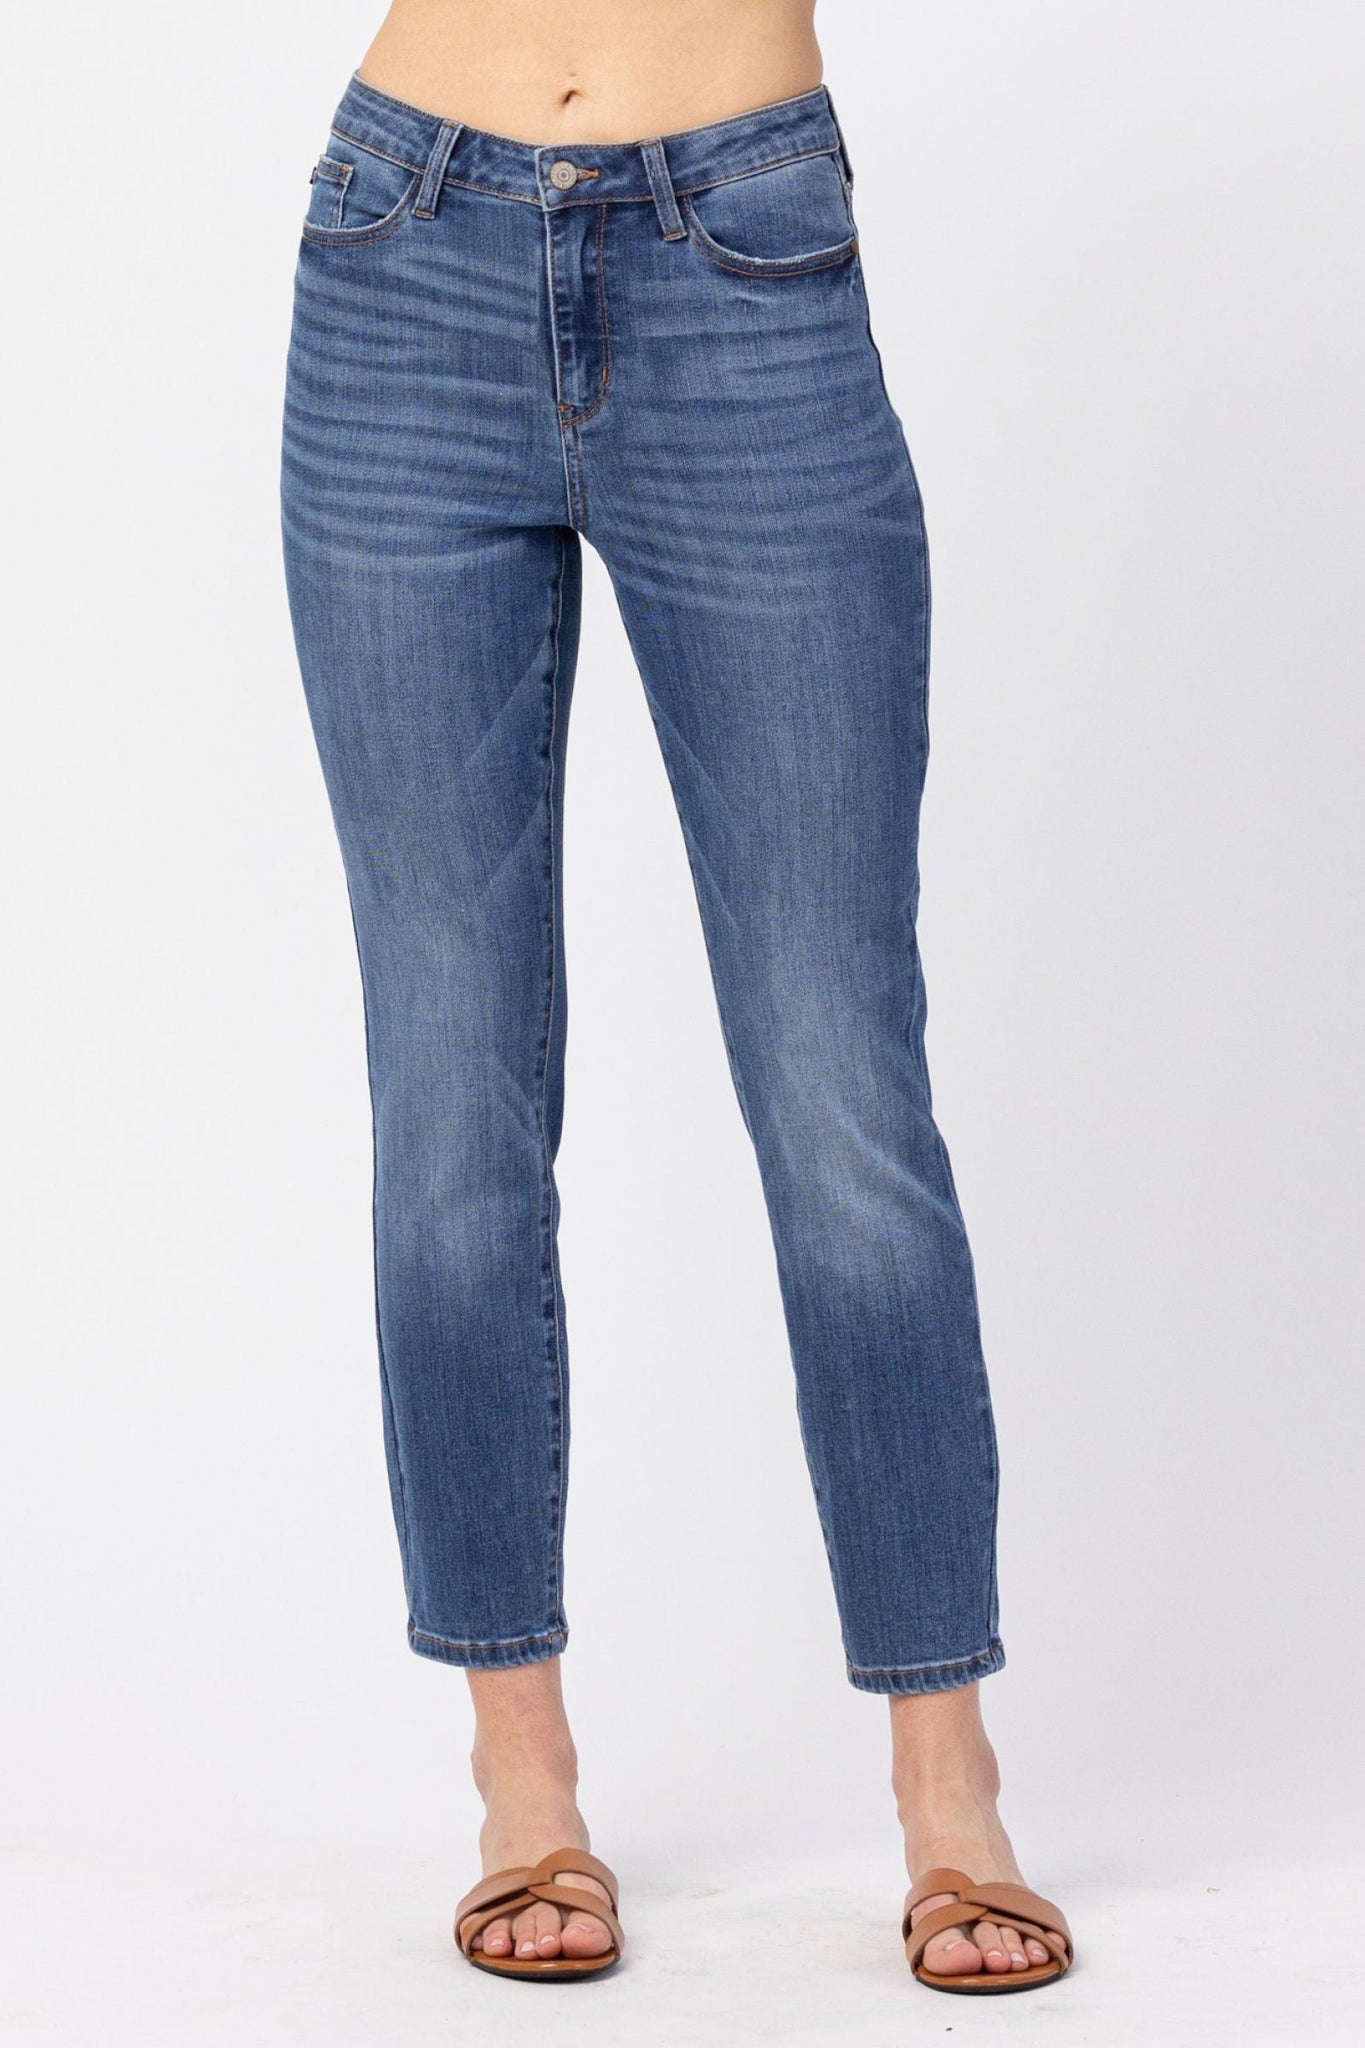 Judy Blue High Waist Slim Fit Jeans 82294 - Exclusive-Jeans-Sunshine and Wine Boutique